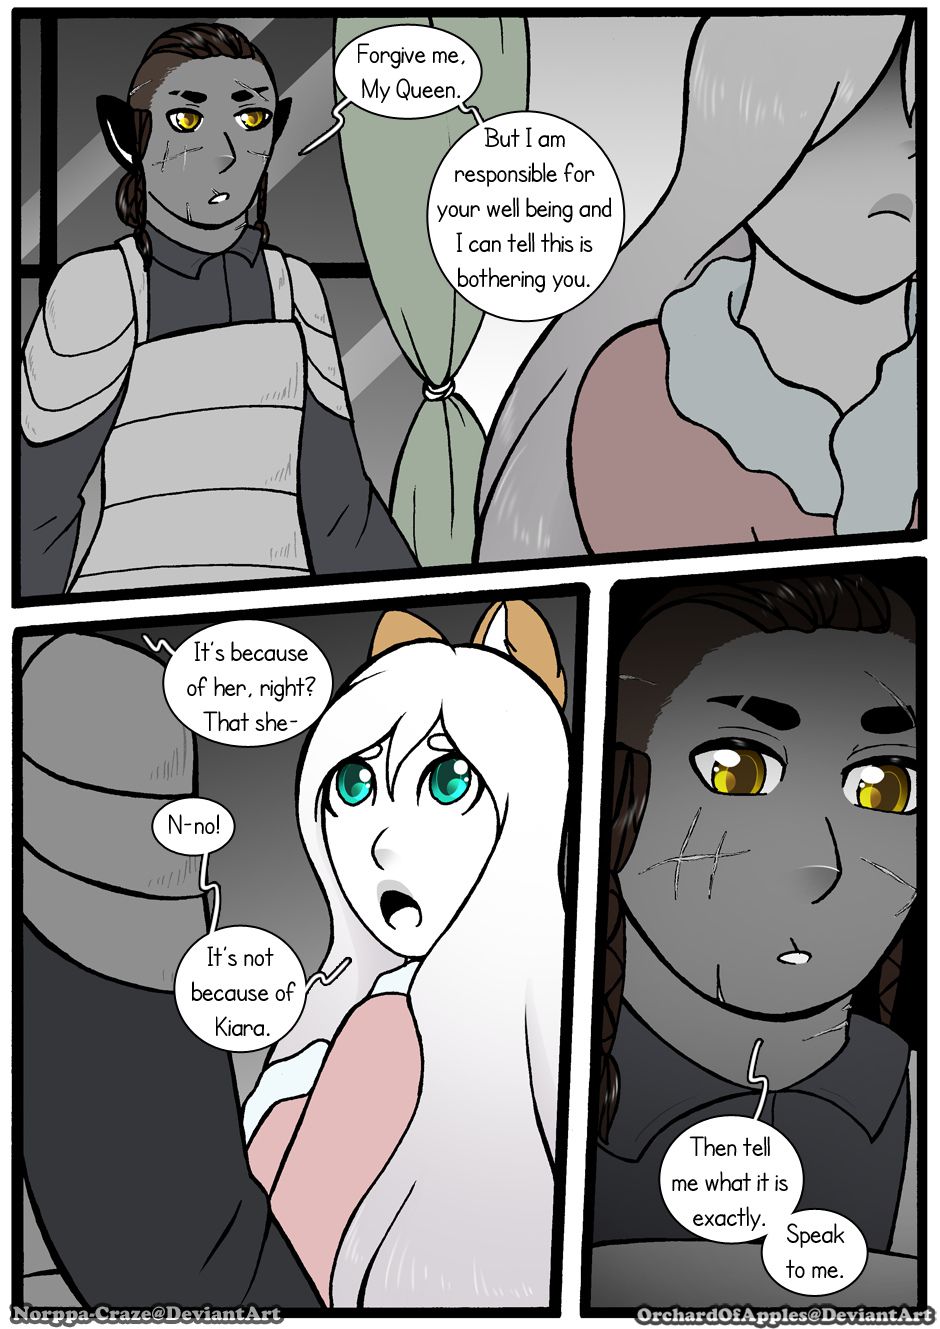 [Jeny-jen94] Between Kings and Queens [Ongoing] 314